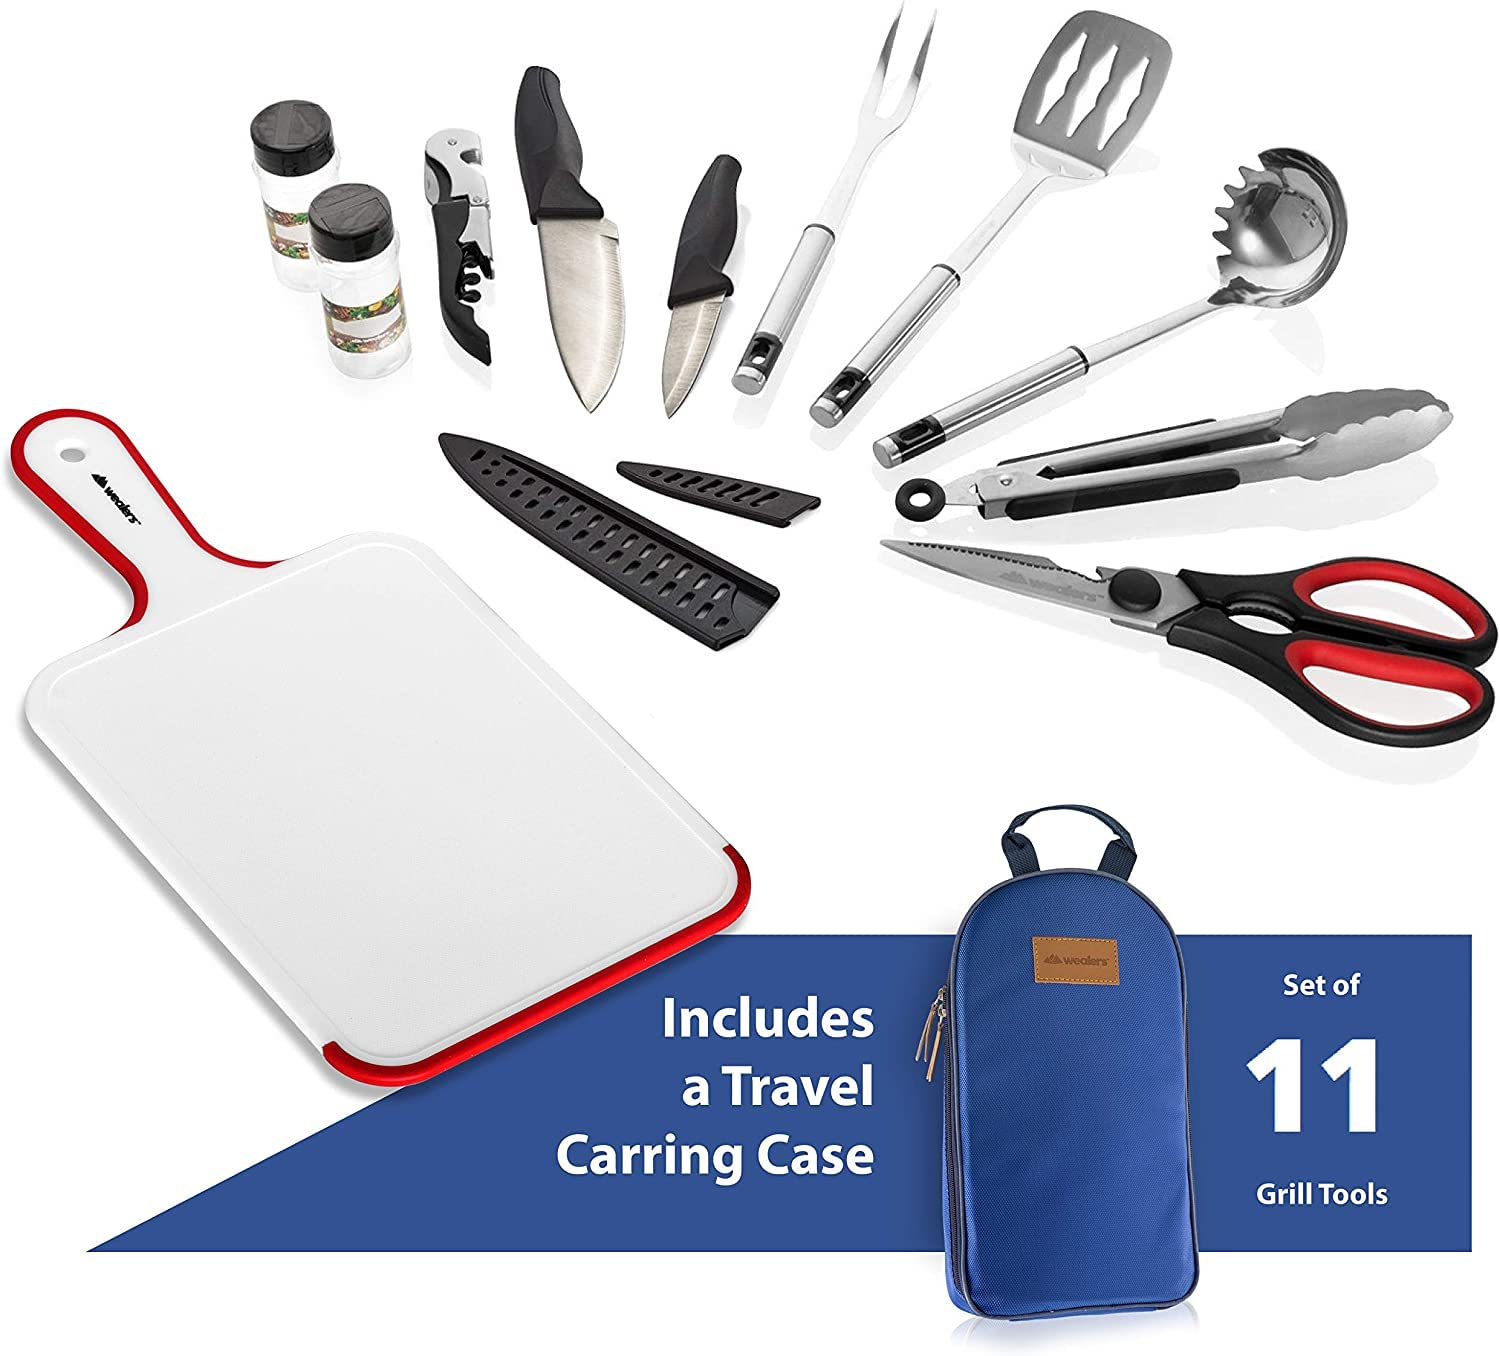 Camp Kitchen Cooking Utensil Set Travel Organizer Grill Accessories Portable Compact Gear for Backpacking BBQ Camping Hiking Travel Cookware Kit Water Resistant Case  - Like New